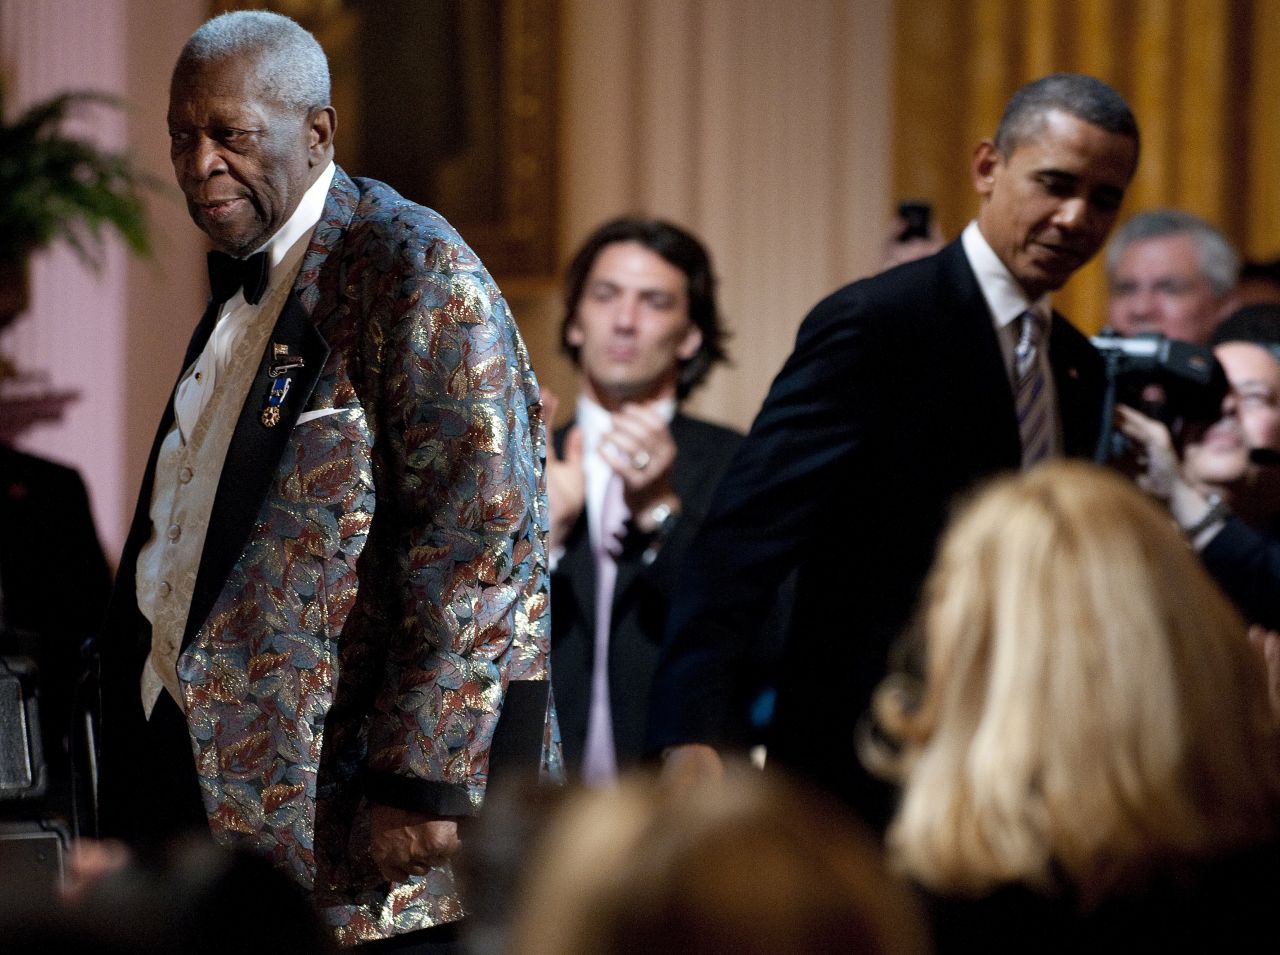 The French people and media get a kick out of seeing Obama's laid back demeanor, his hipness, and yes, his impromptu duets with B.B. King.